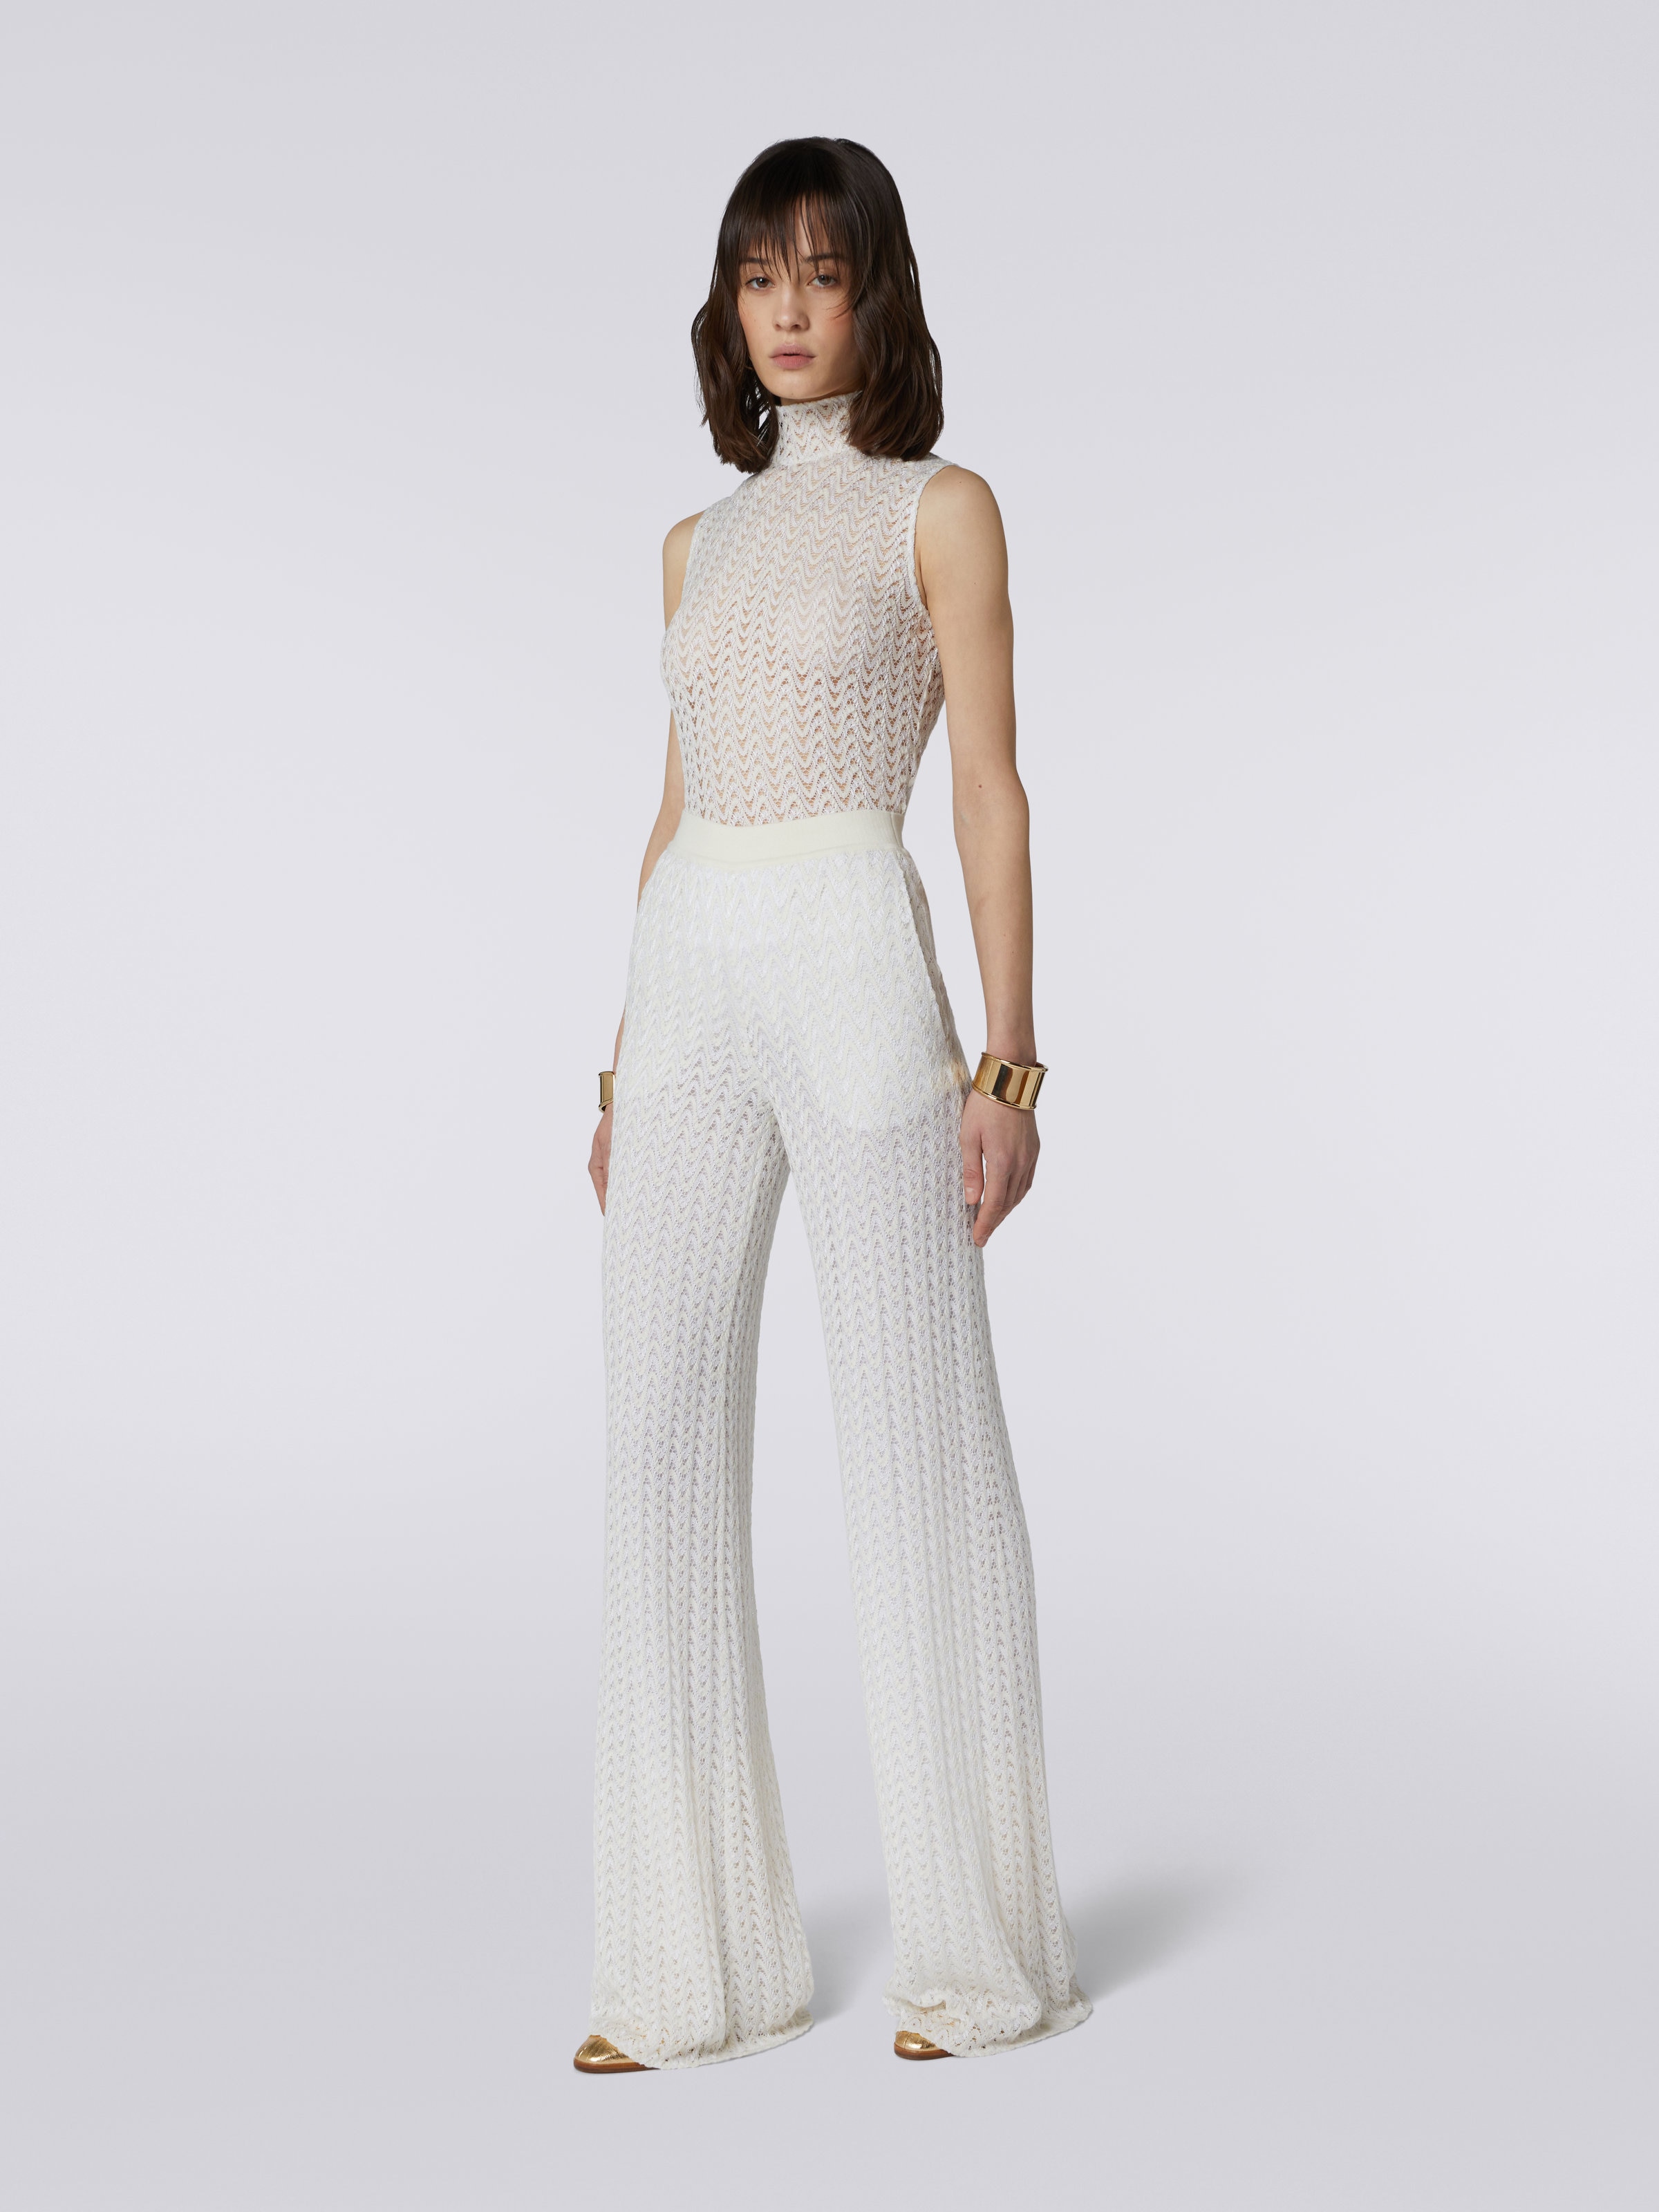 Palazzo pants in raschel knit wool and viscose, White  - 1